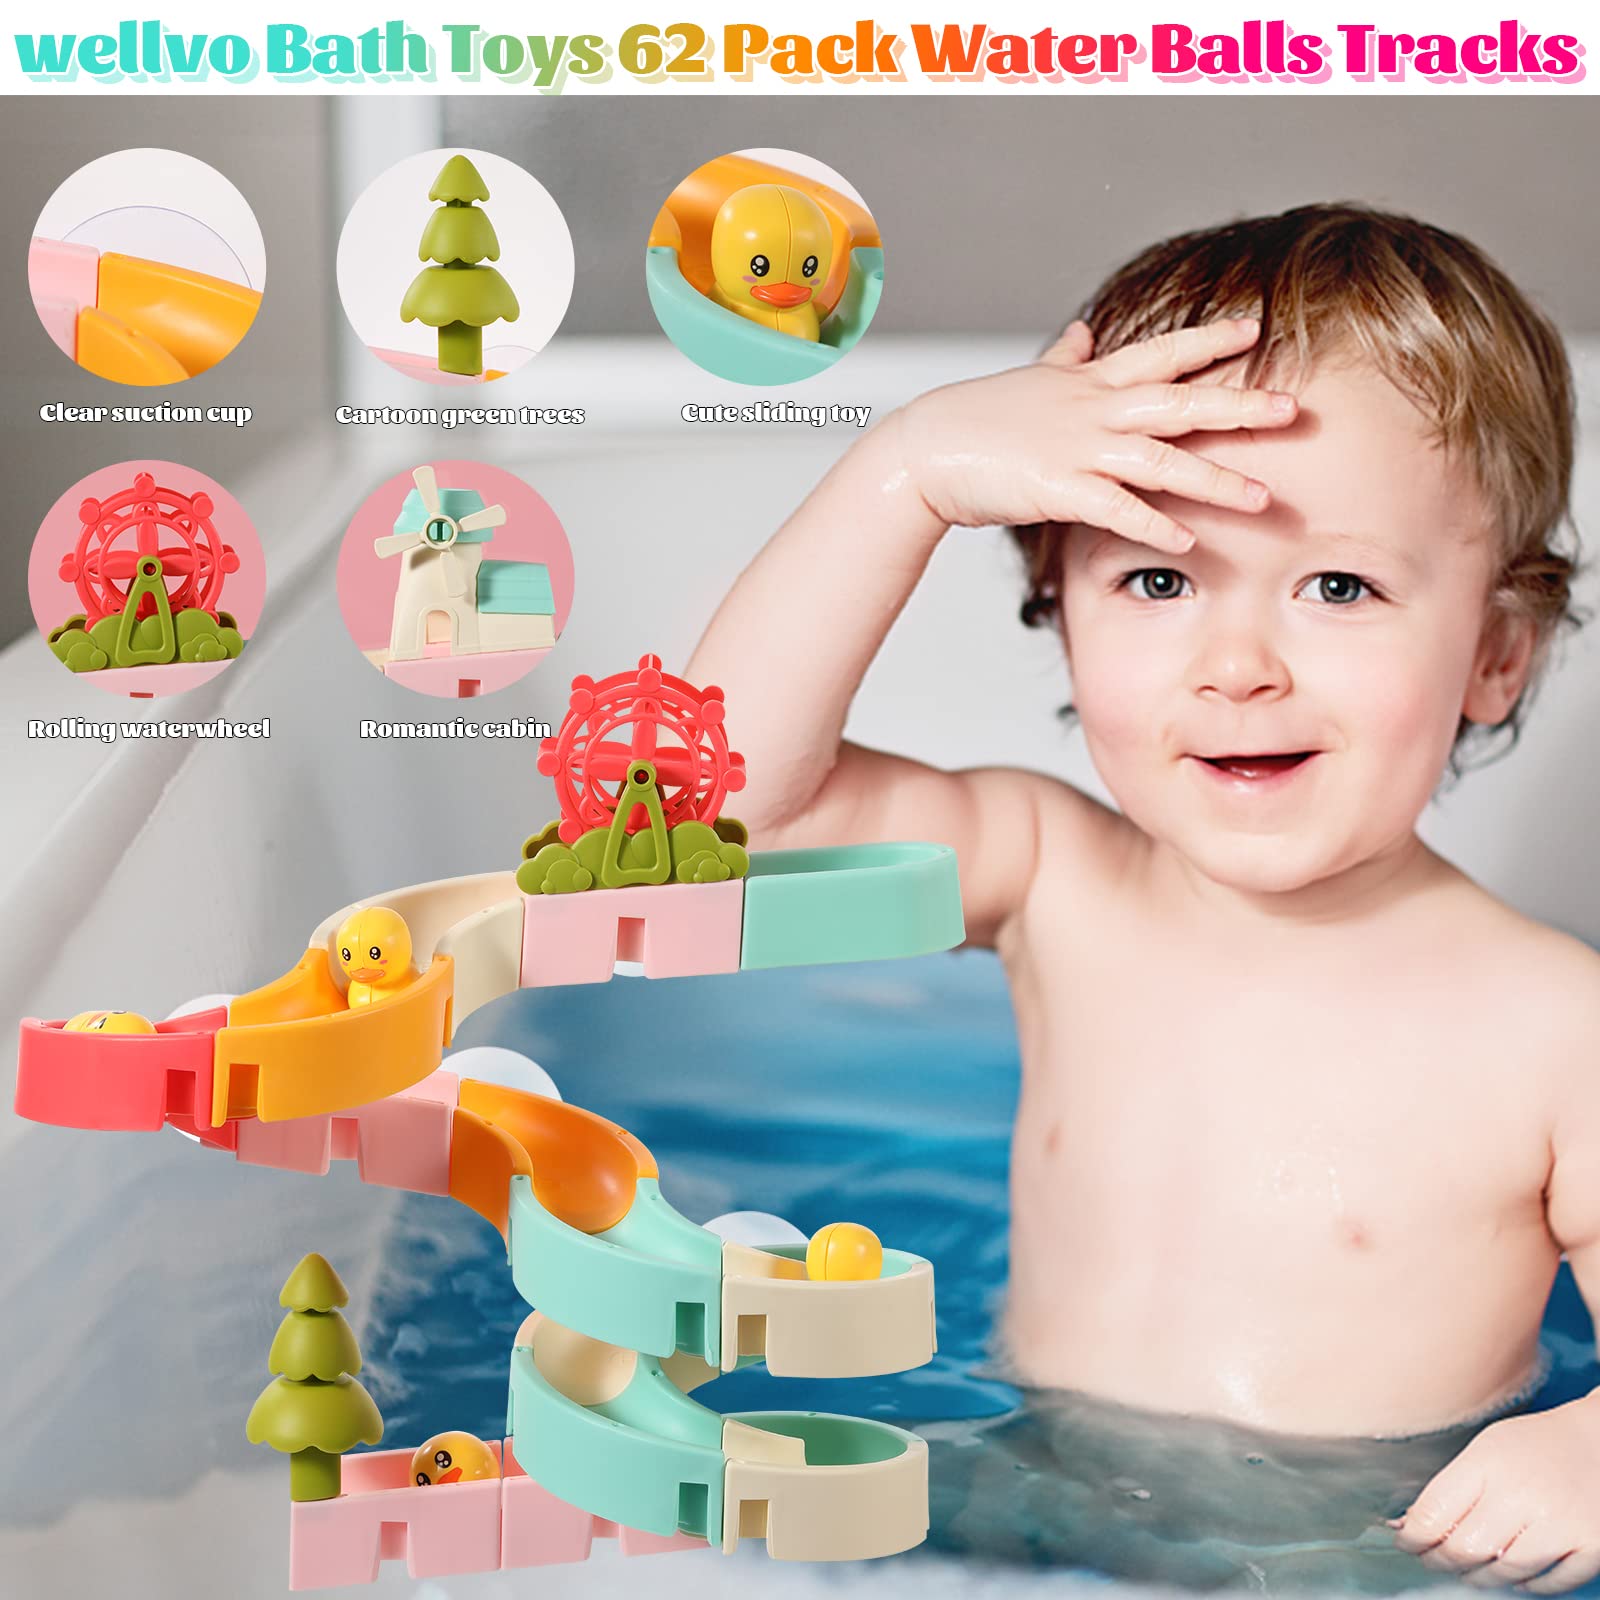 WELLVO 62PCS Bath Toys for Kids Ages 4-8 Duck Slide Bath Toys Wall Bathtub Toy Slide Bath Time Toys for Toddlers 3 4 5 6 Years DIY Take Apart Tracks Set Shower Toys Birthday Gifts for Boys Girls